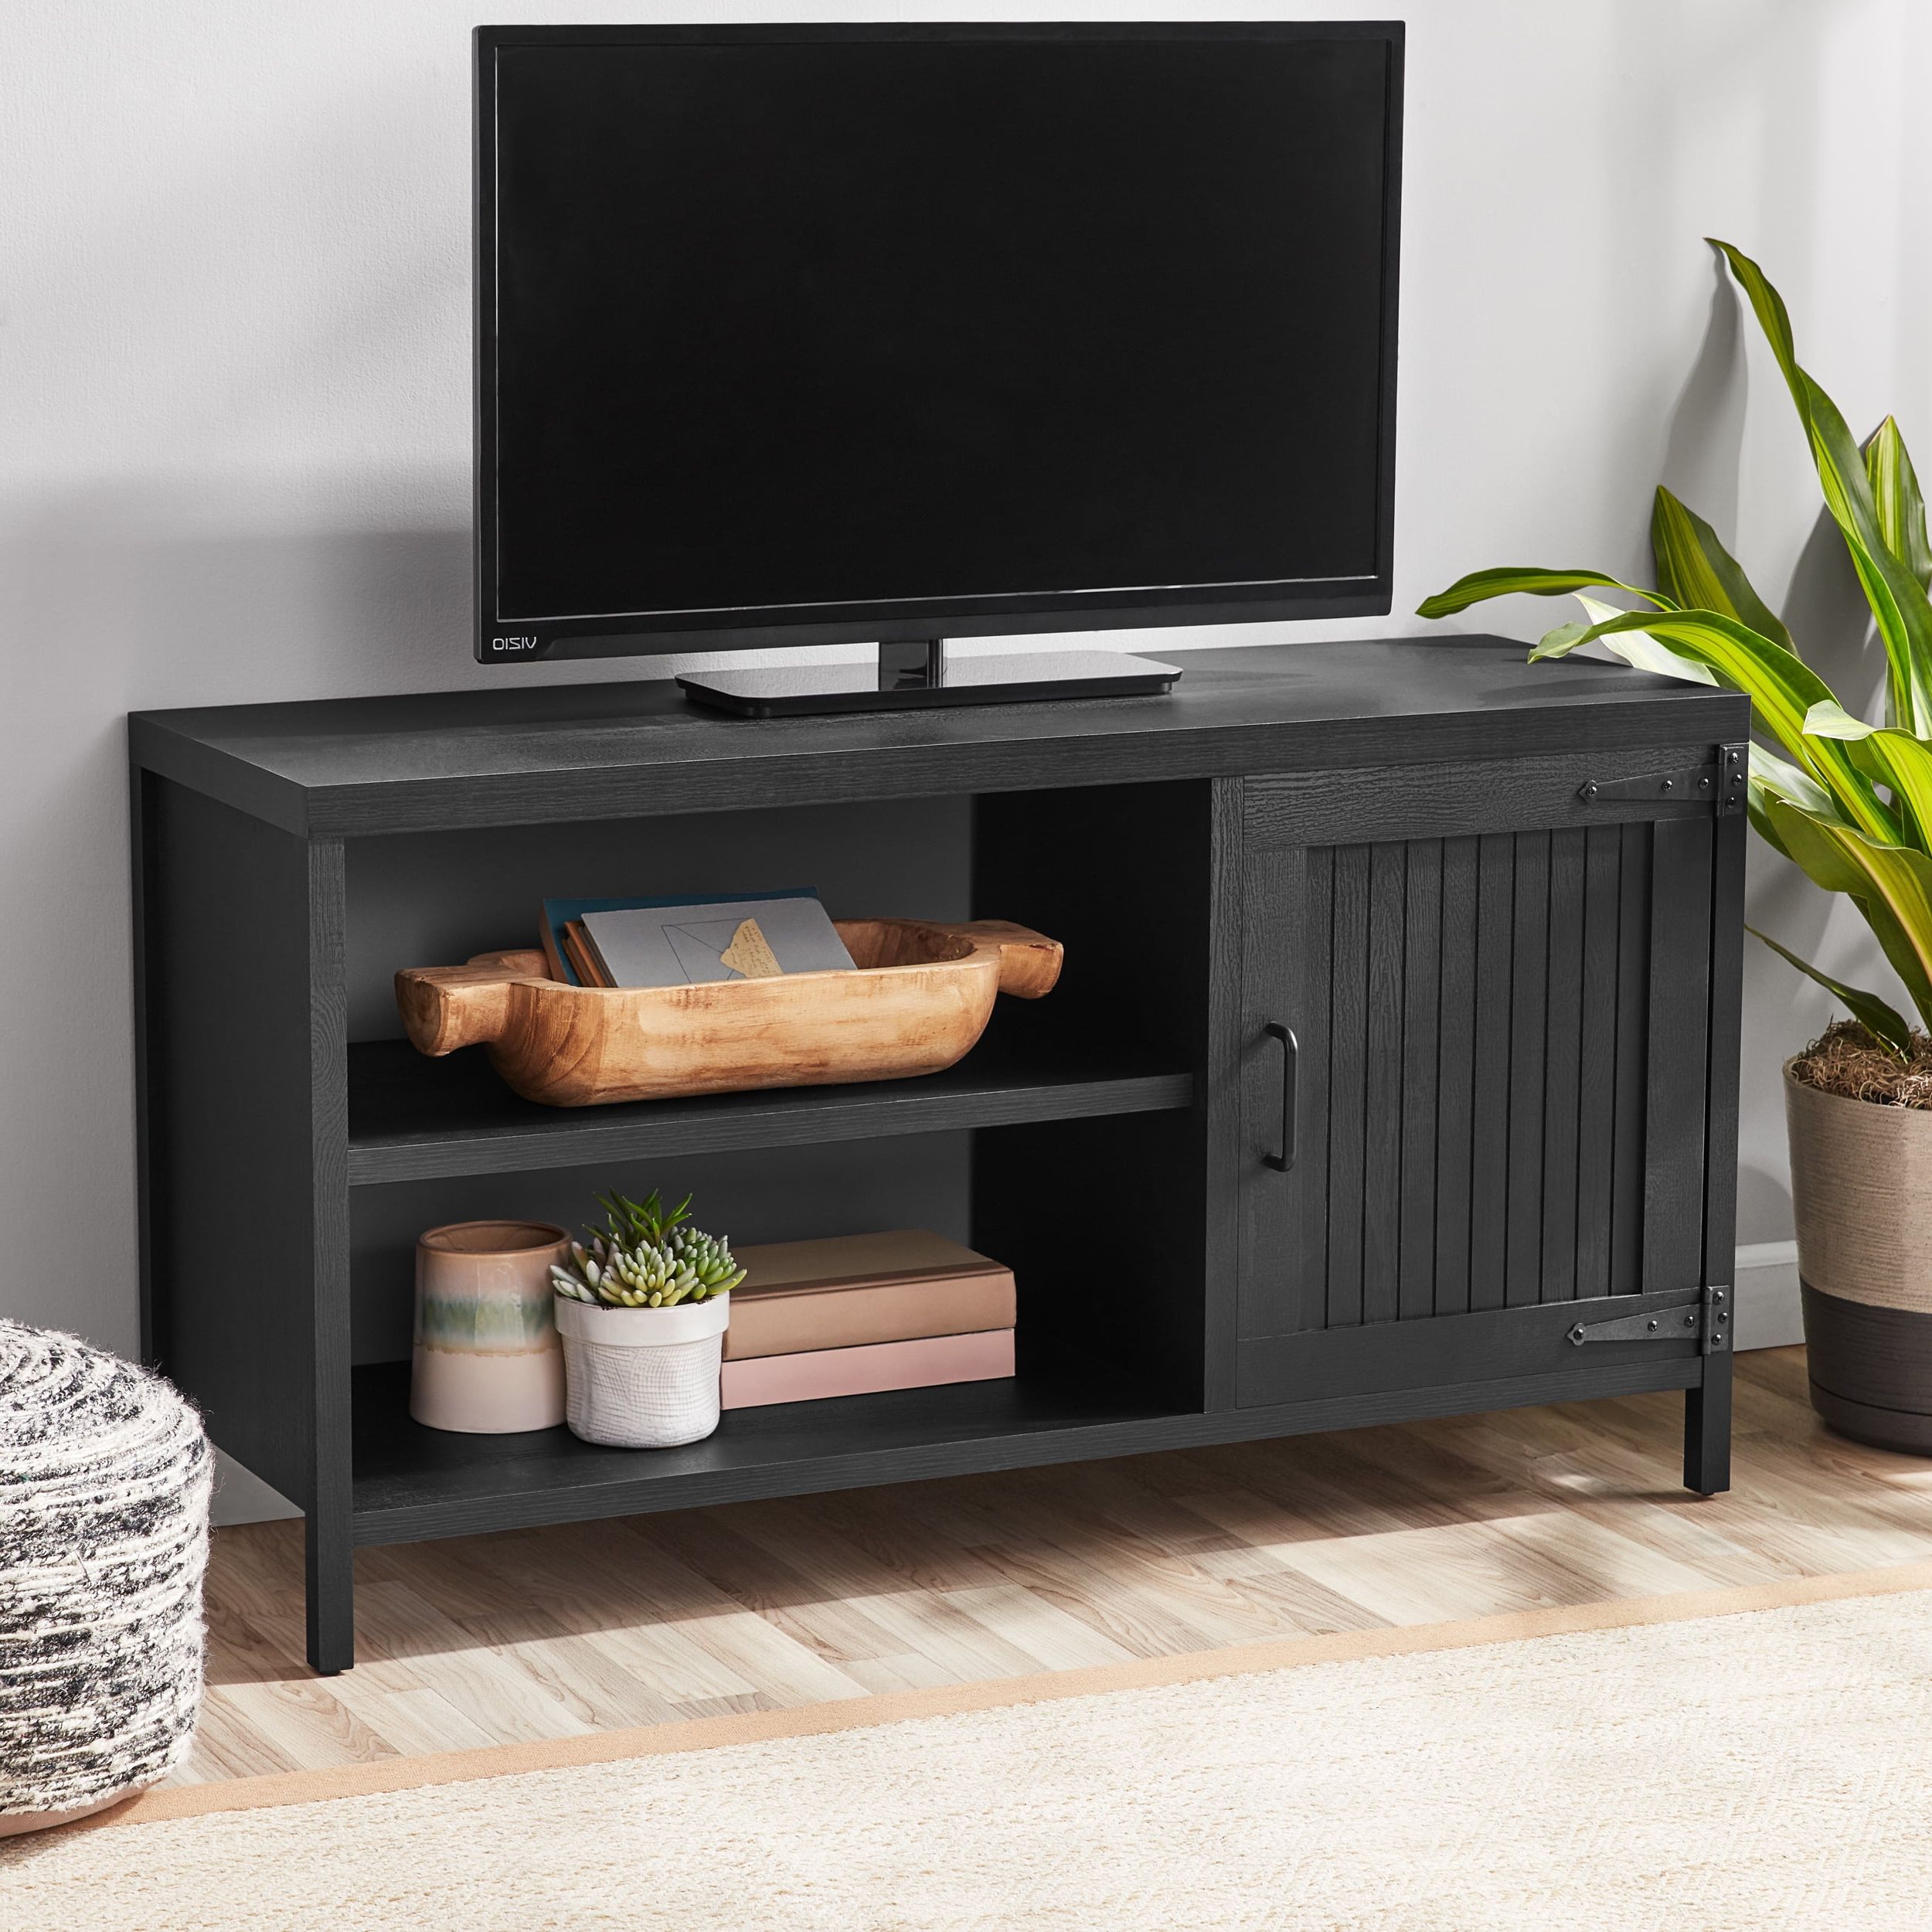 Mainstays Farmhouse Tv Stand For Tvs Up To 50", Black – Walmart Intended For Farmhouse Stands For Tvs (Gallery 7 of 20)